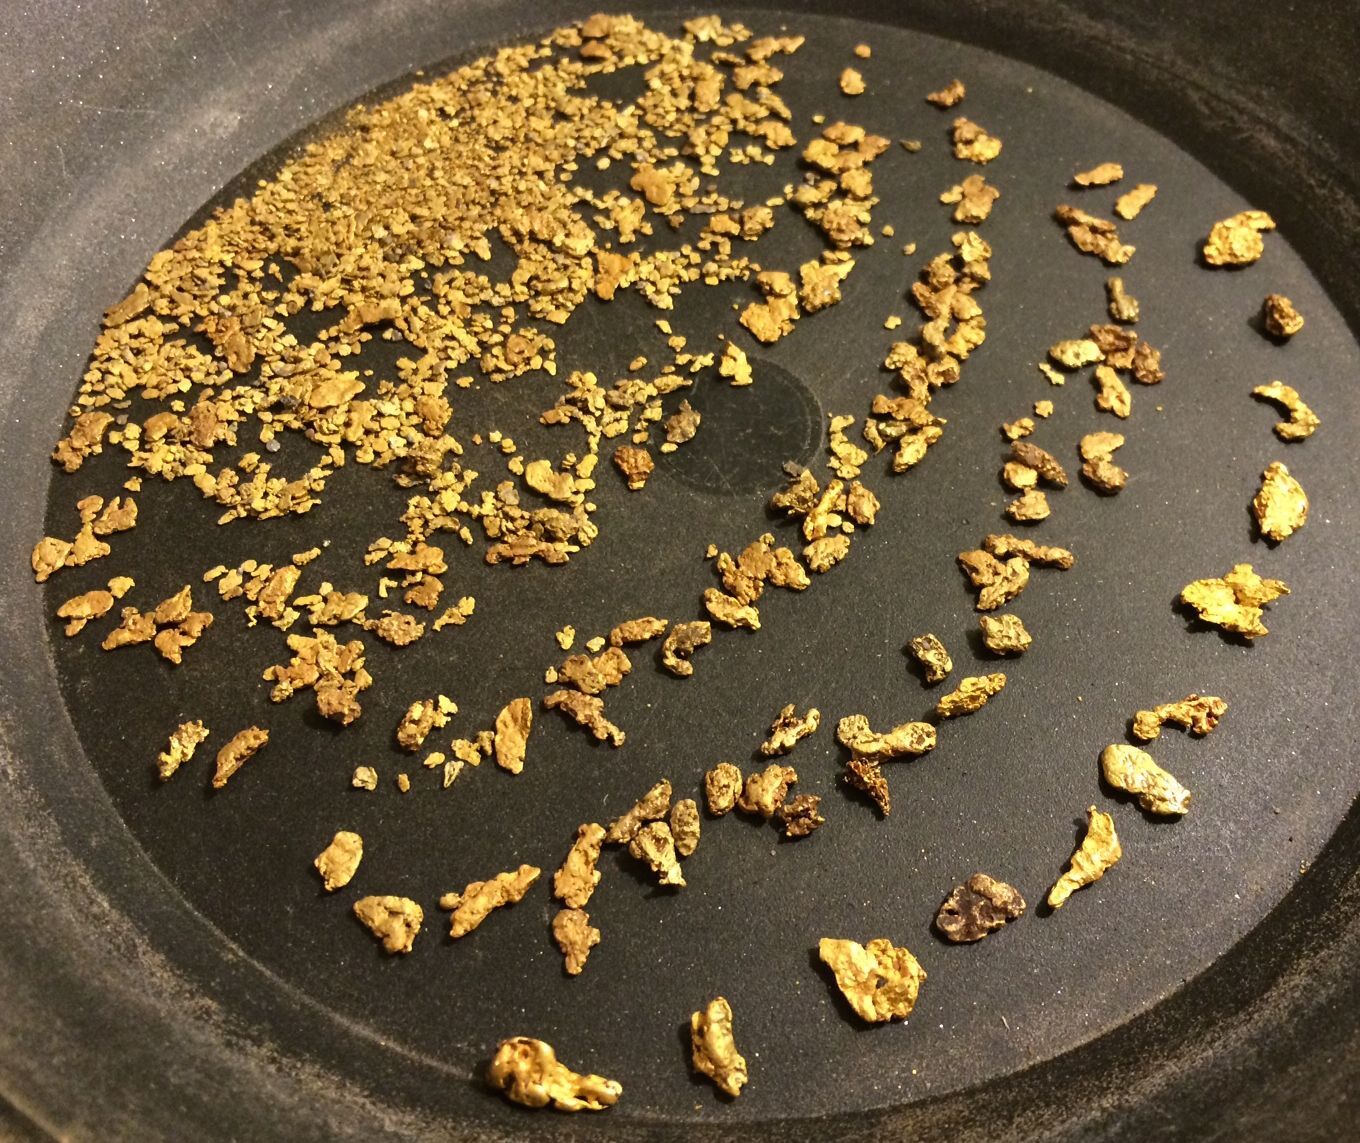 Gold Paydirt 2 lbs 100% Unsearched and Guaranteed Added GOLD! Panning Nuggets Без бренда - фотография #3